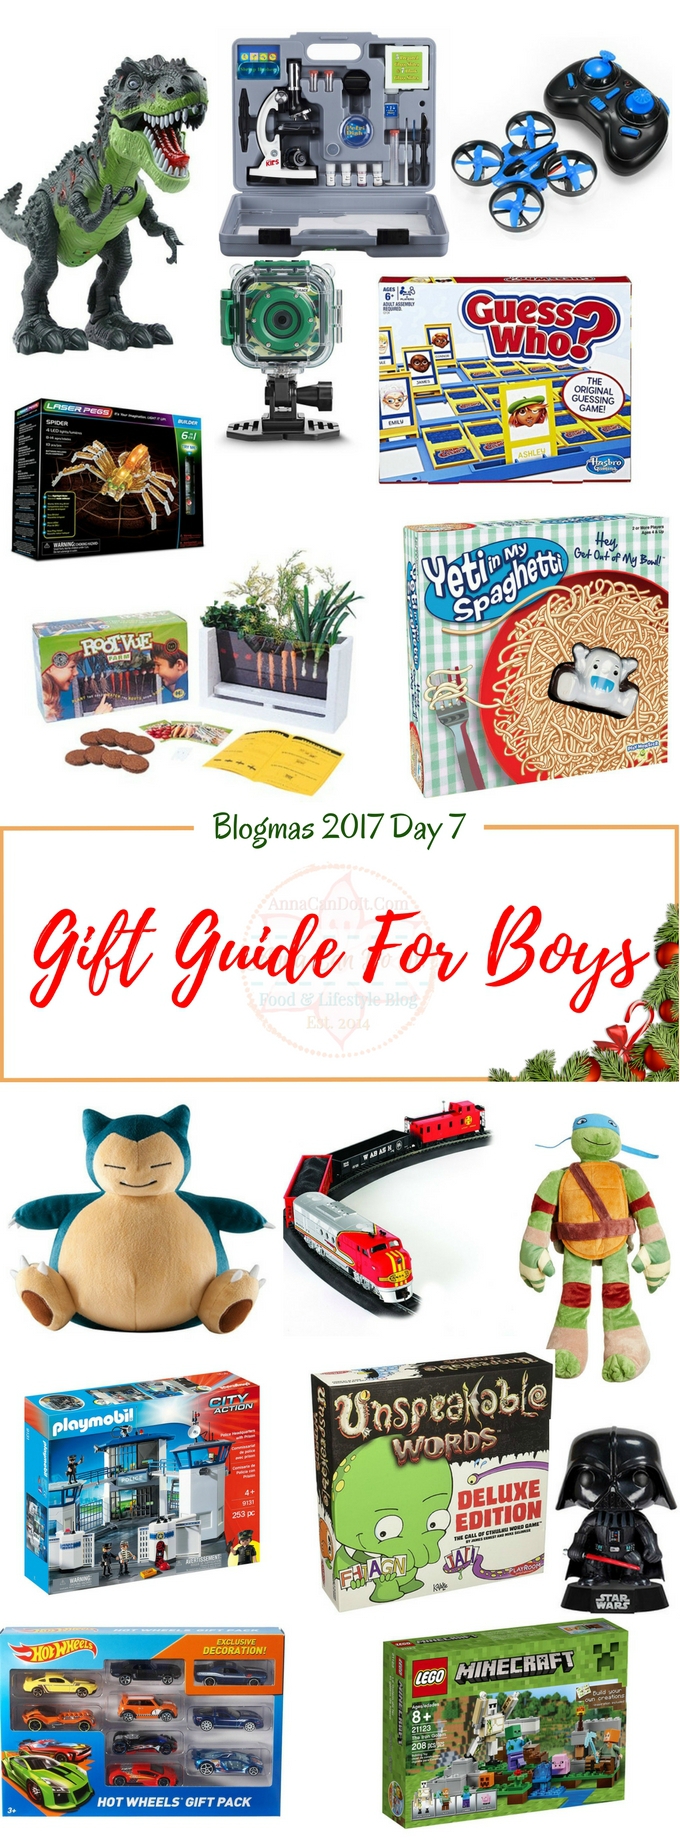 Gift Guide For Boys - Blogmas 2017 Day 7 - Anna Can Do It!